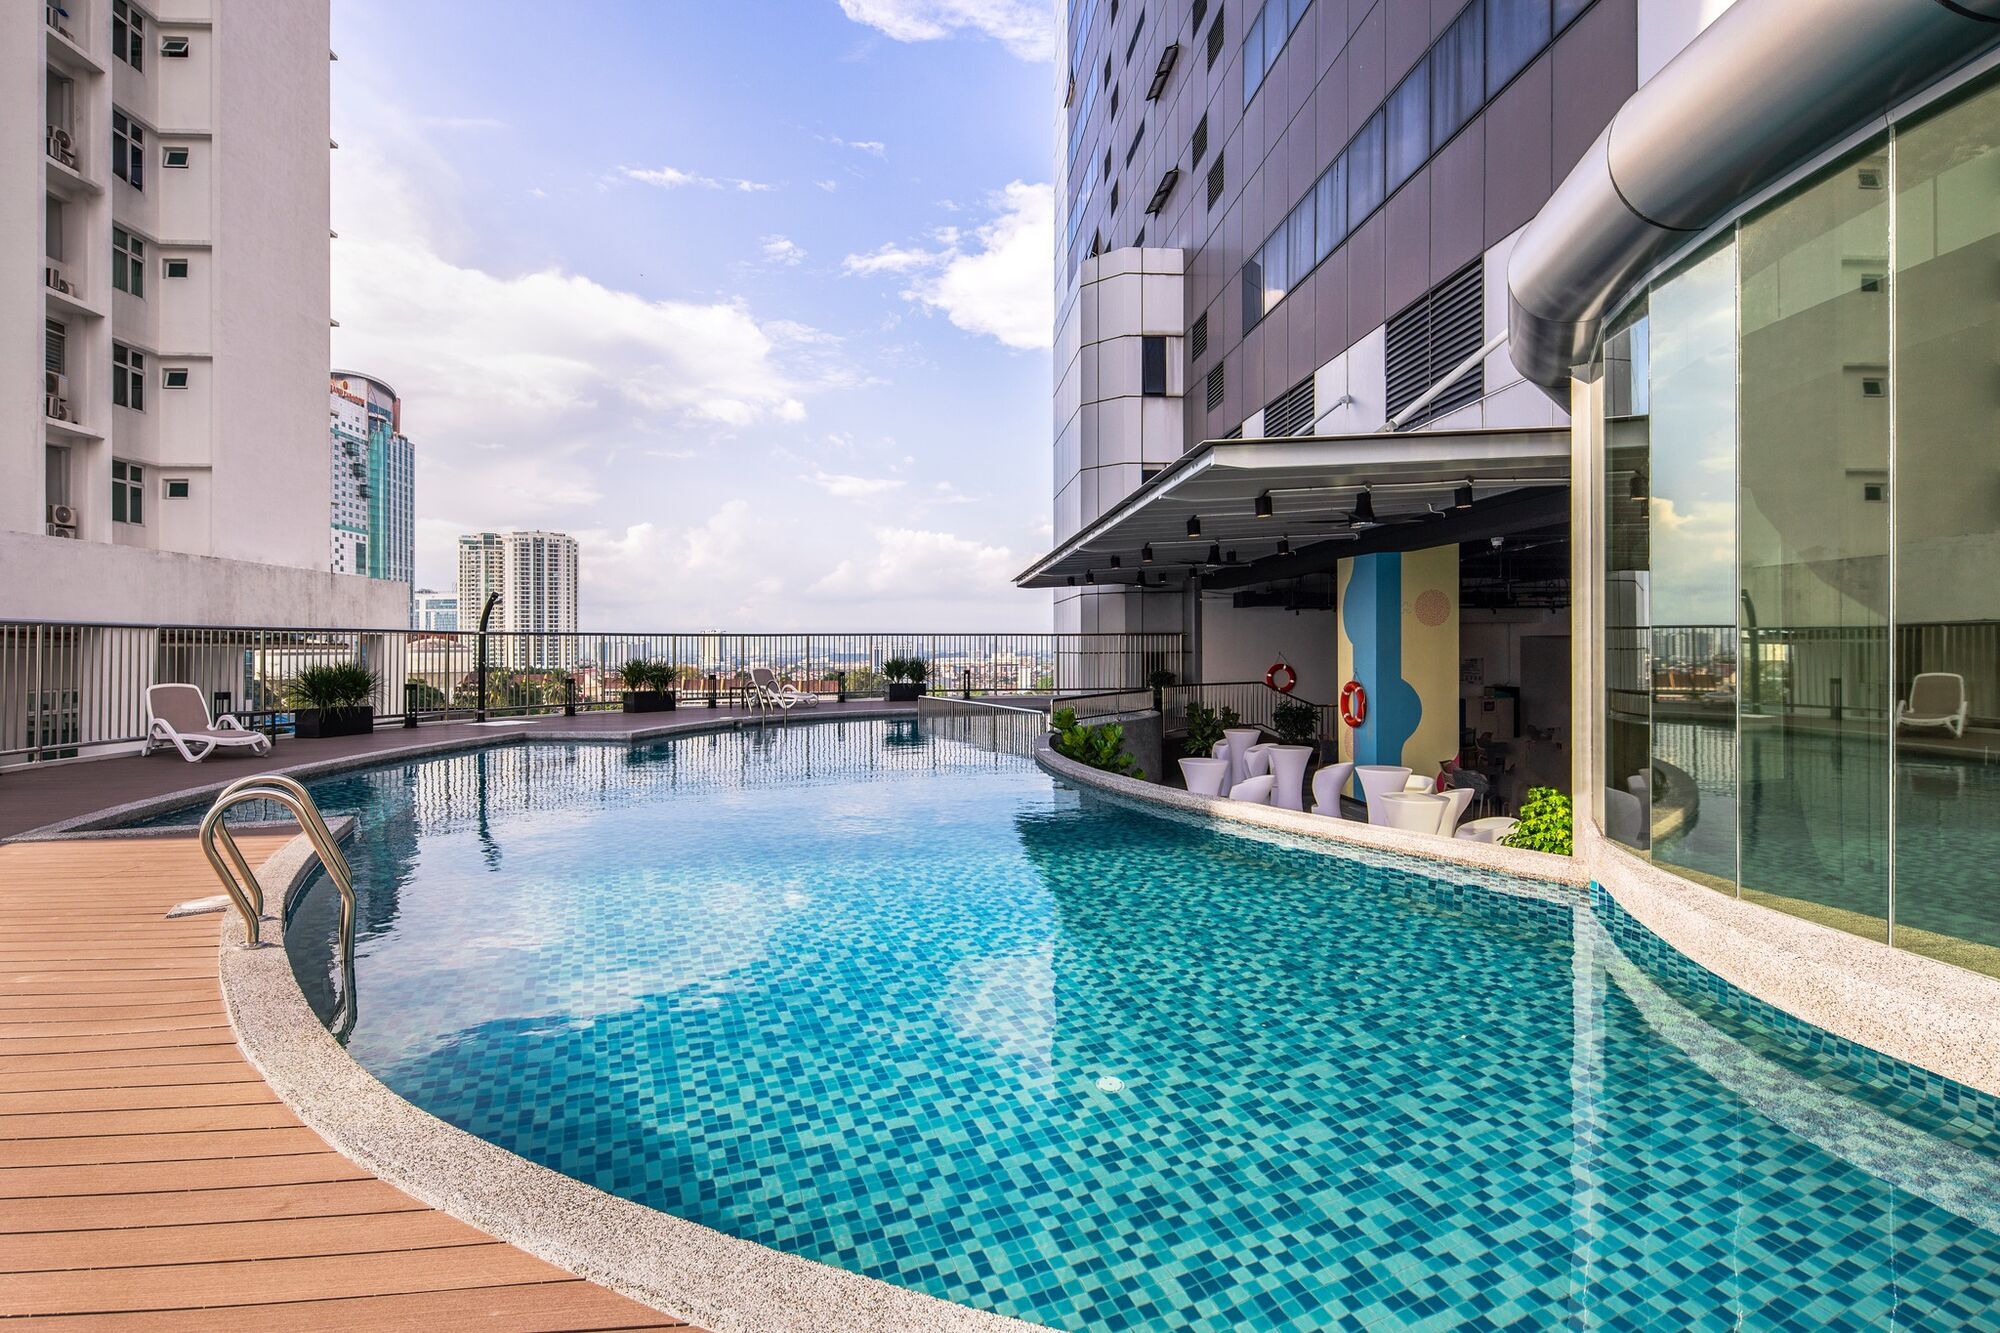 Best one night hotels in Johor Bahru. Seal your recovery with another impressive break